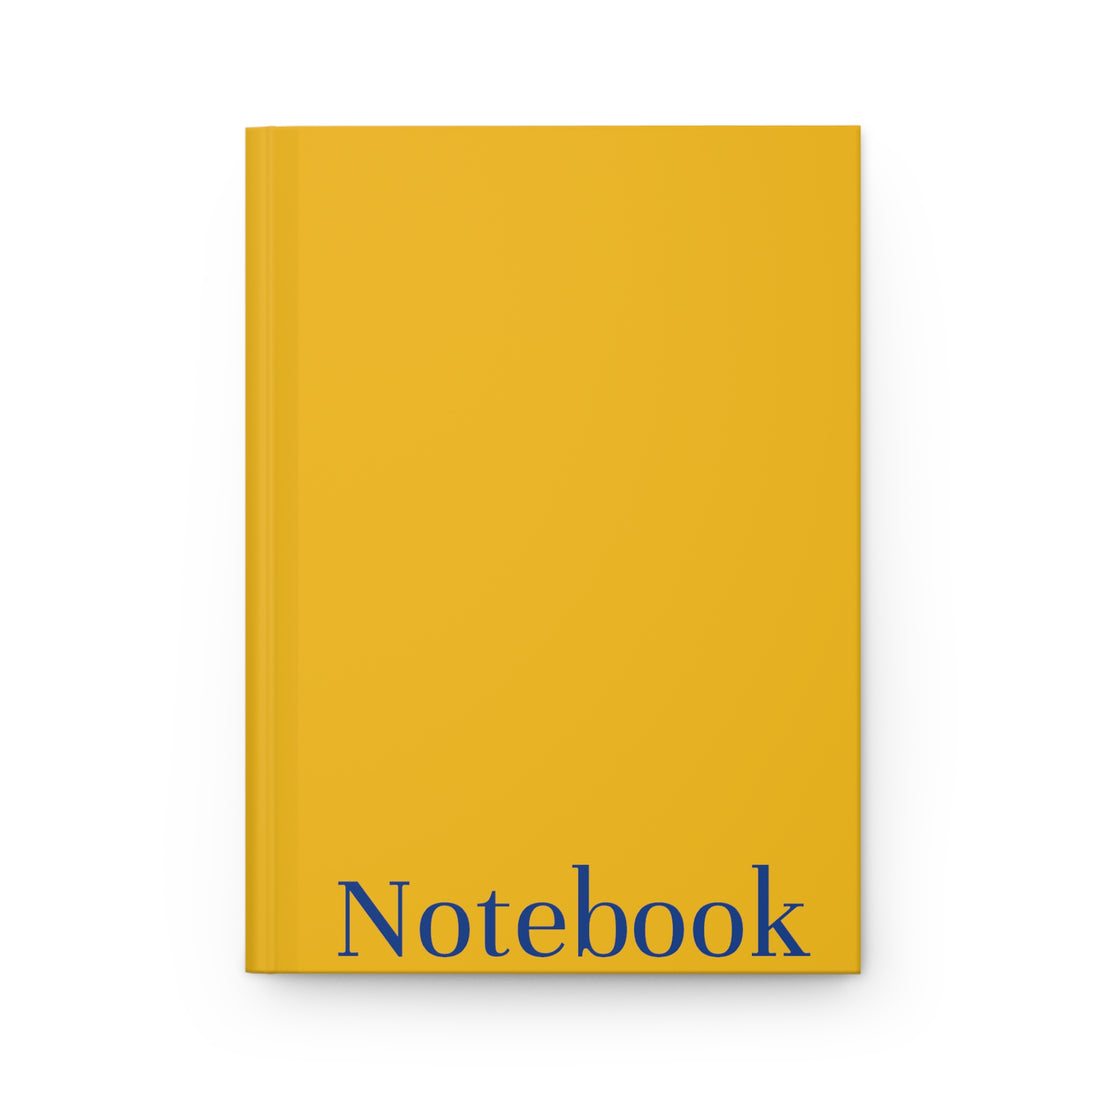 Royal Blue and Gold Notebook, Matte Hardcover Journal